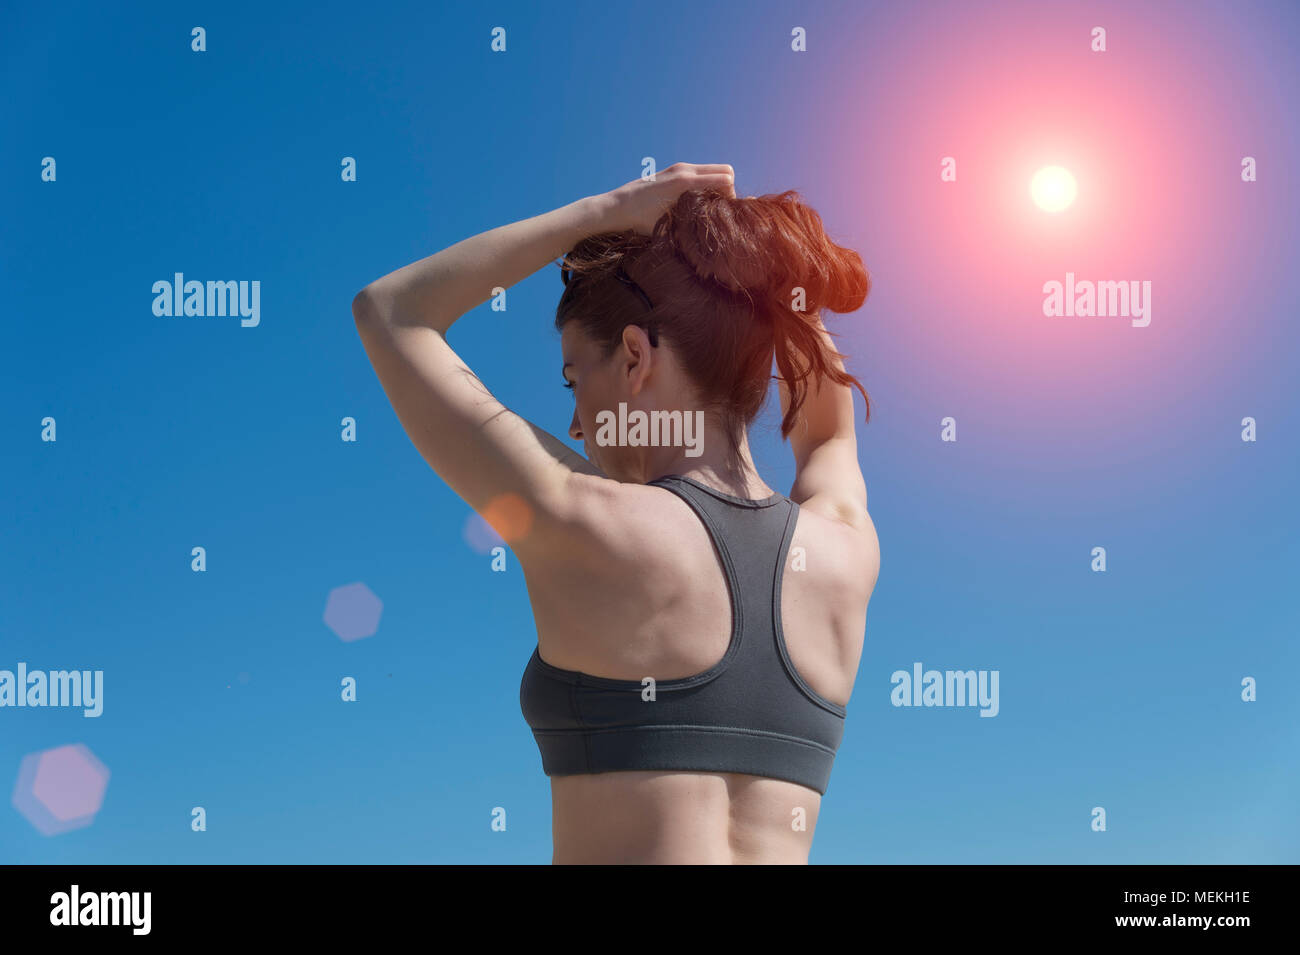 sporty woman wearing a sports bra tying her hair up before training Stock Photo